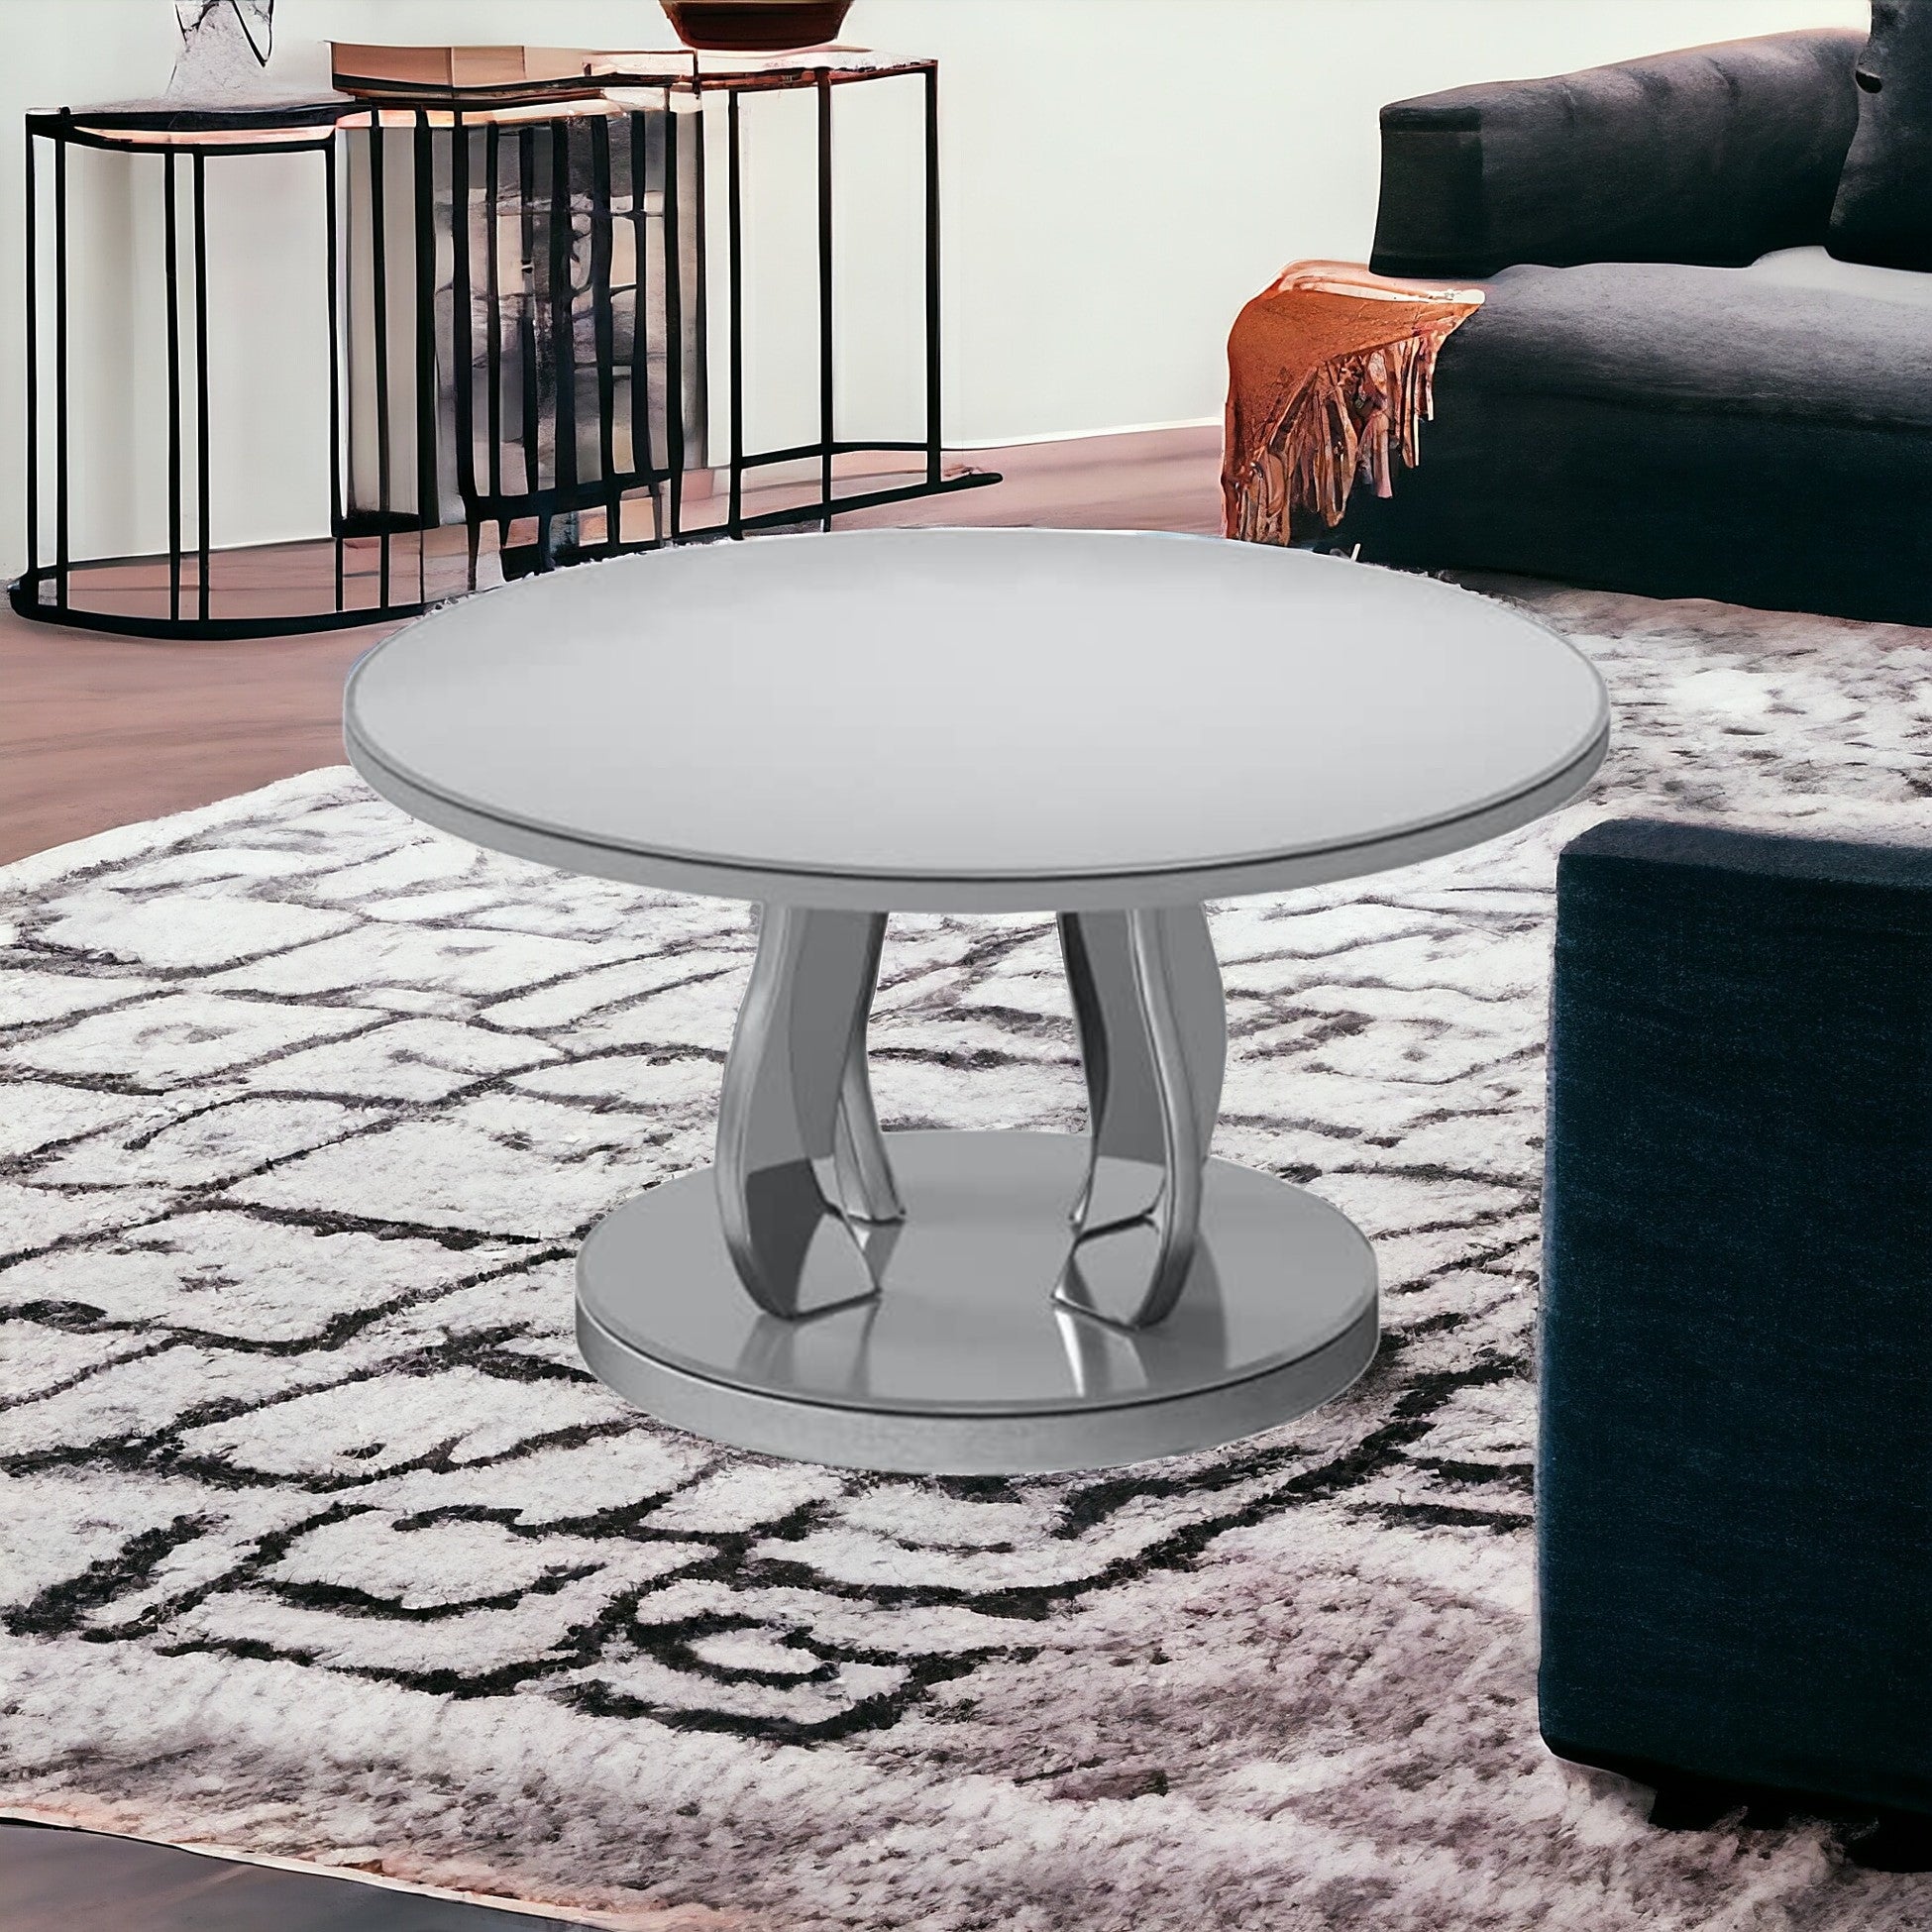 36" Silver Mirrored Round Mirrored Coffee Table